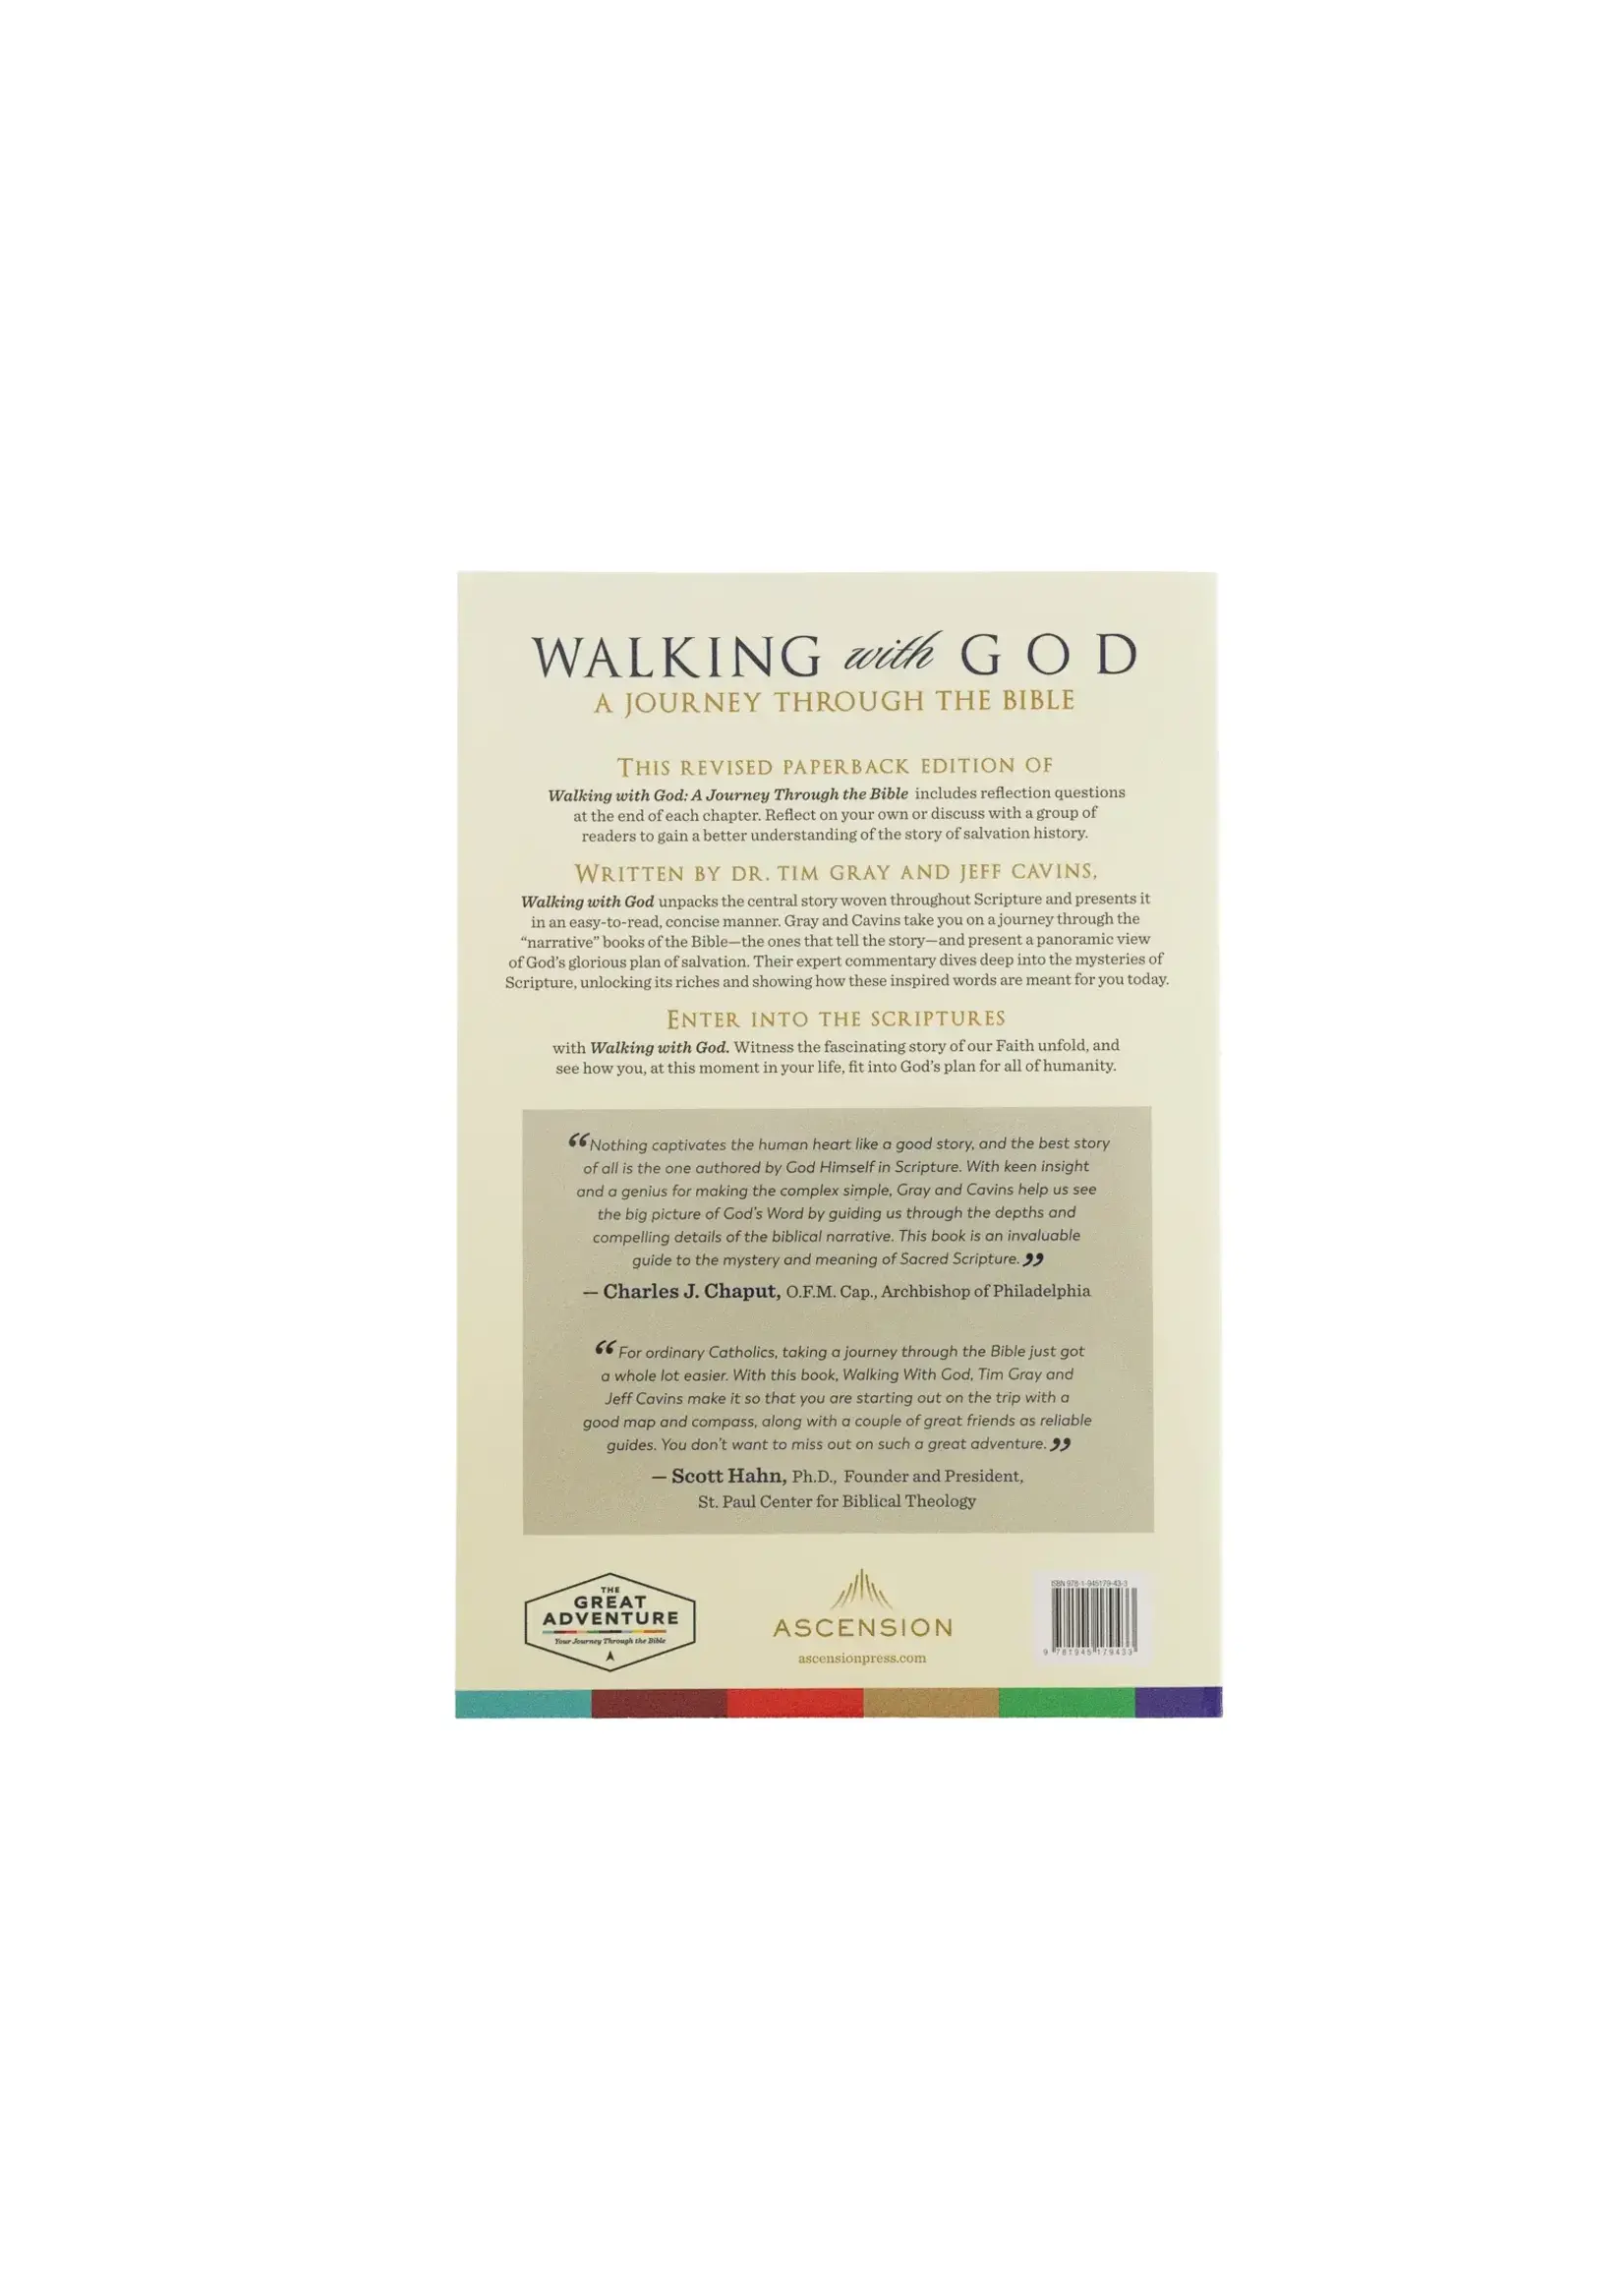 Ascension Press Walking with God: A Journey through the Bible